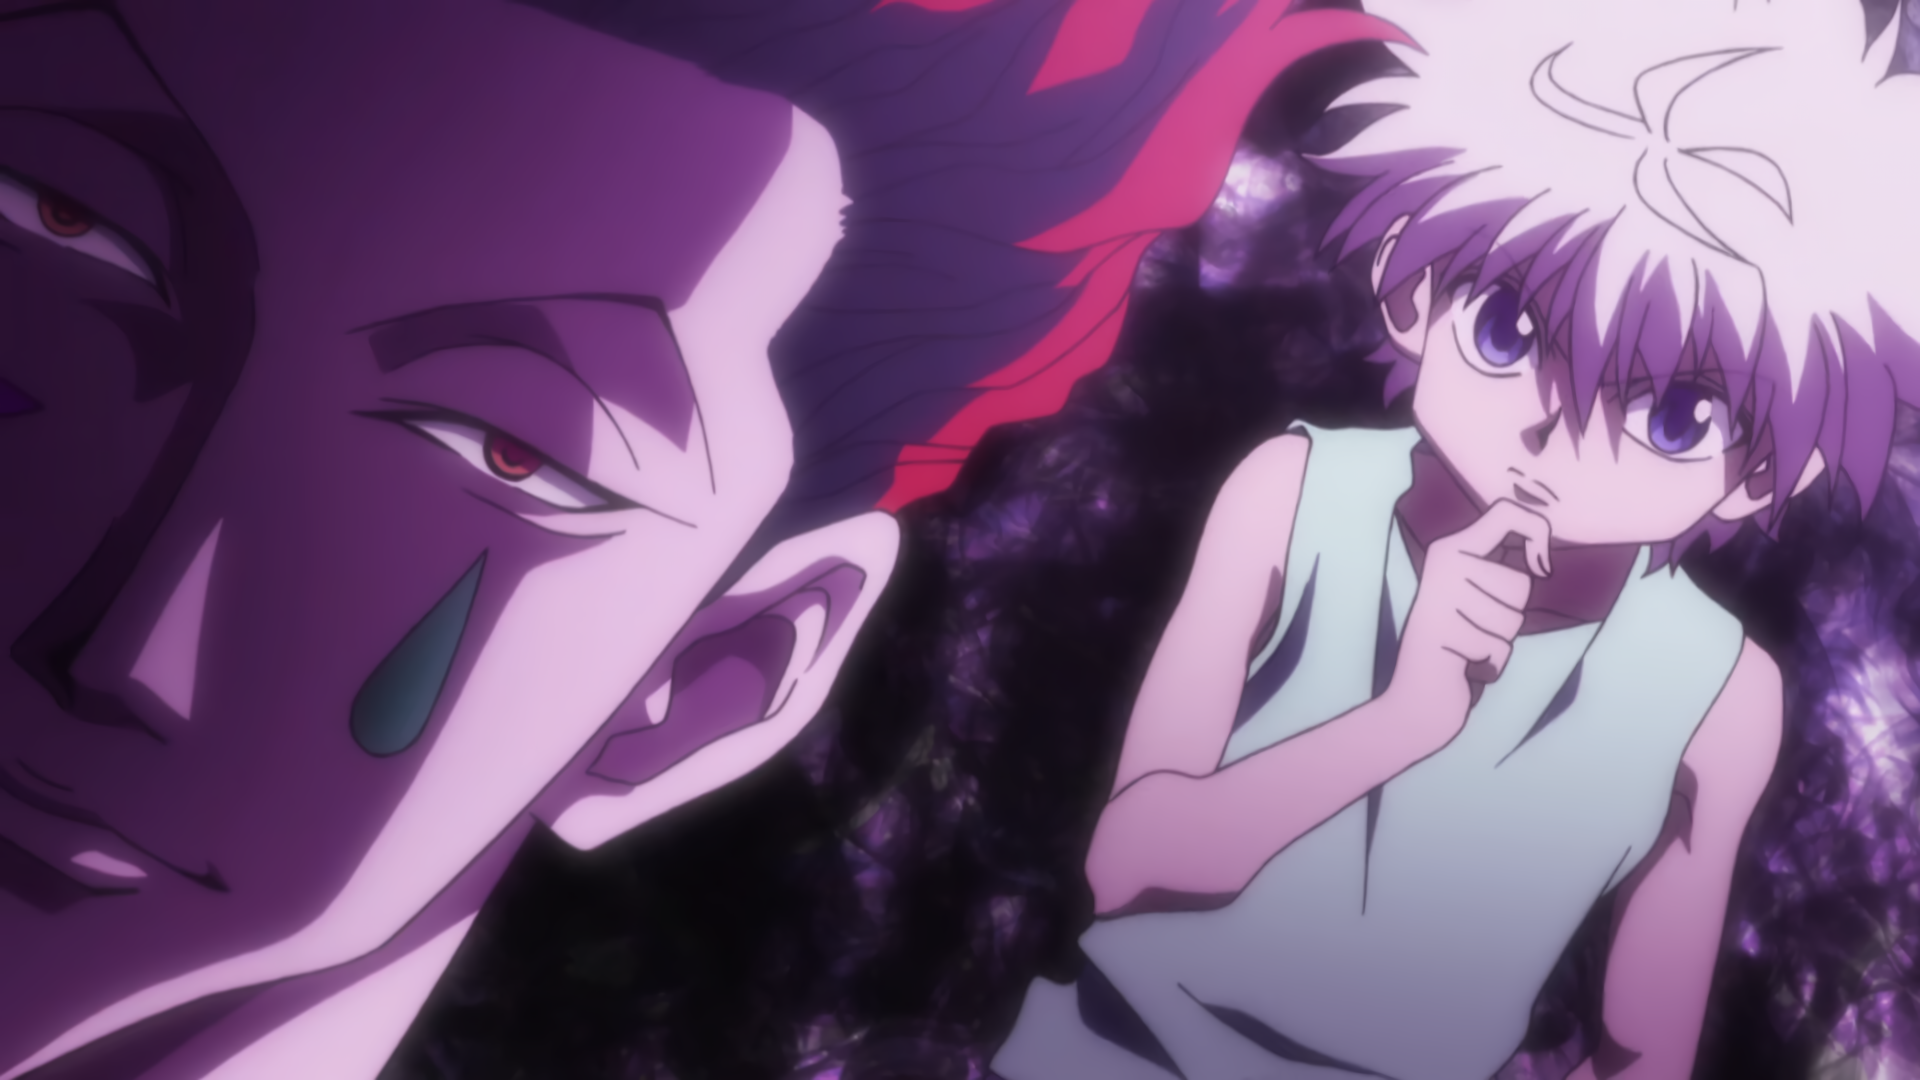 rini of town on X: i genuinely think this (just over) one minute of  straight fight animation between hisoka n gon is the best scene in hxh  hands down and i Will